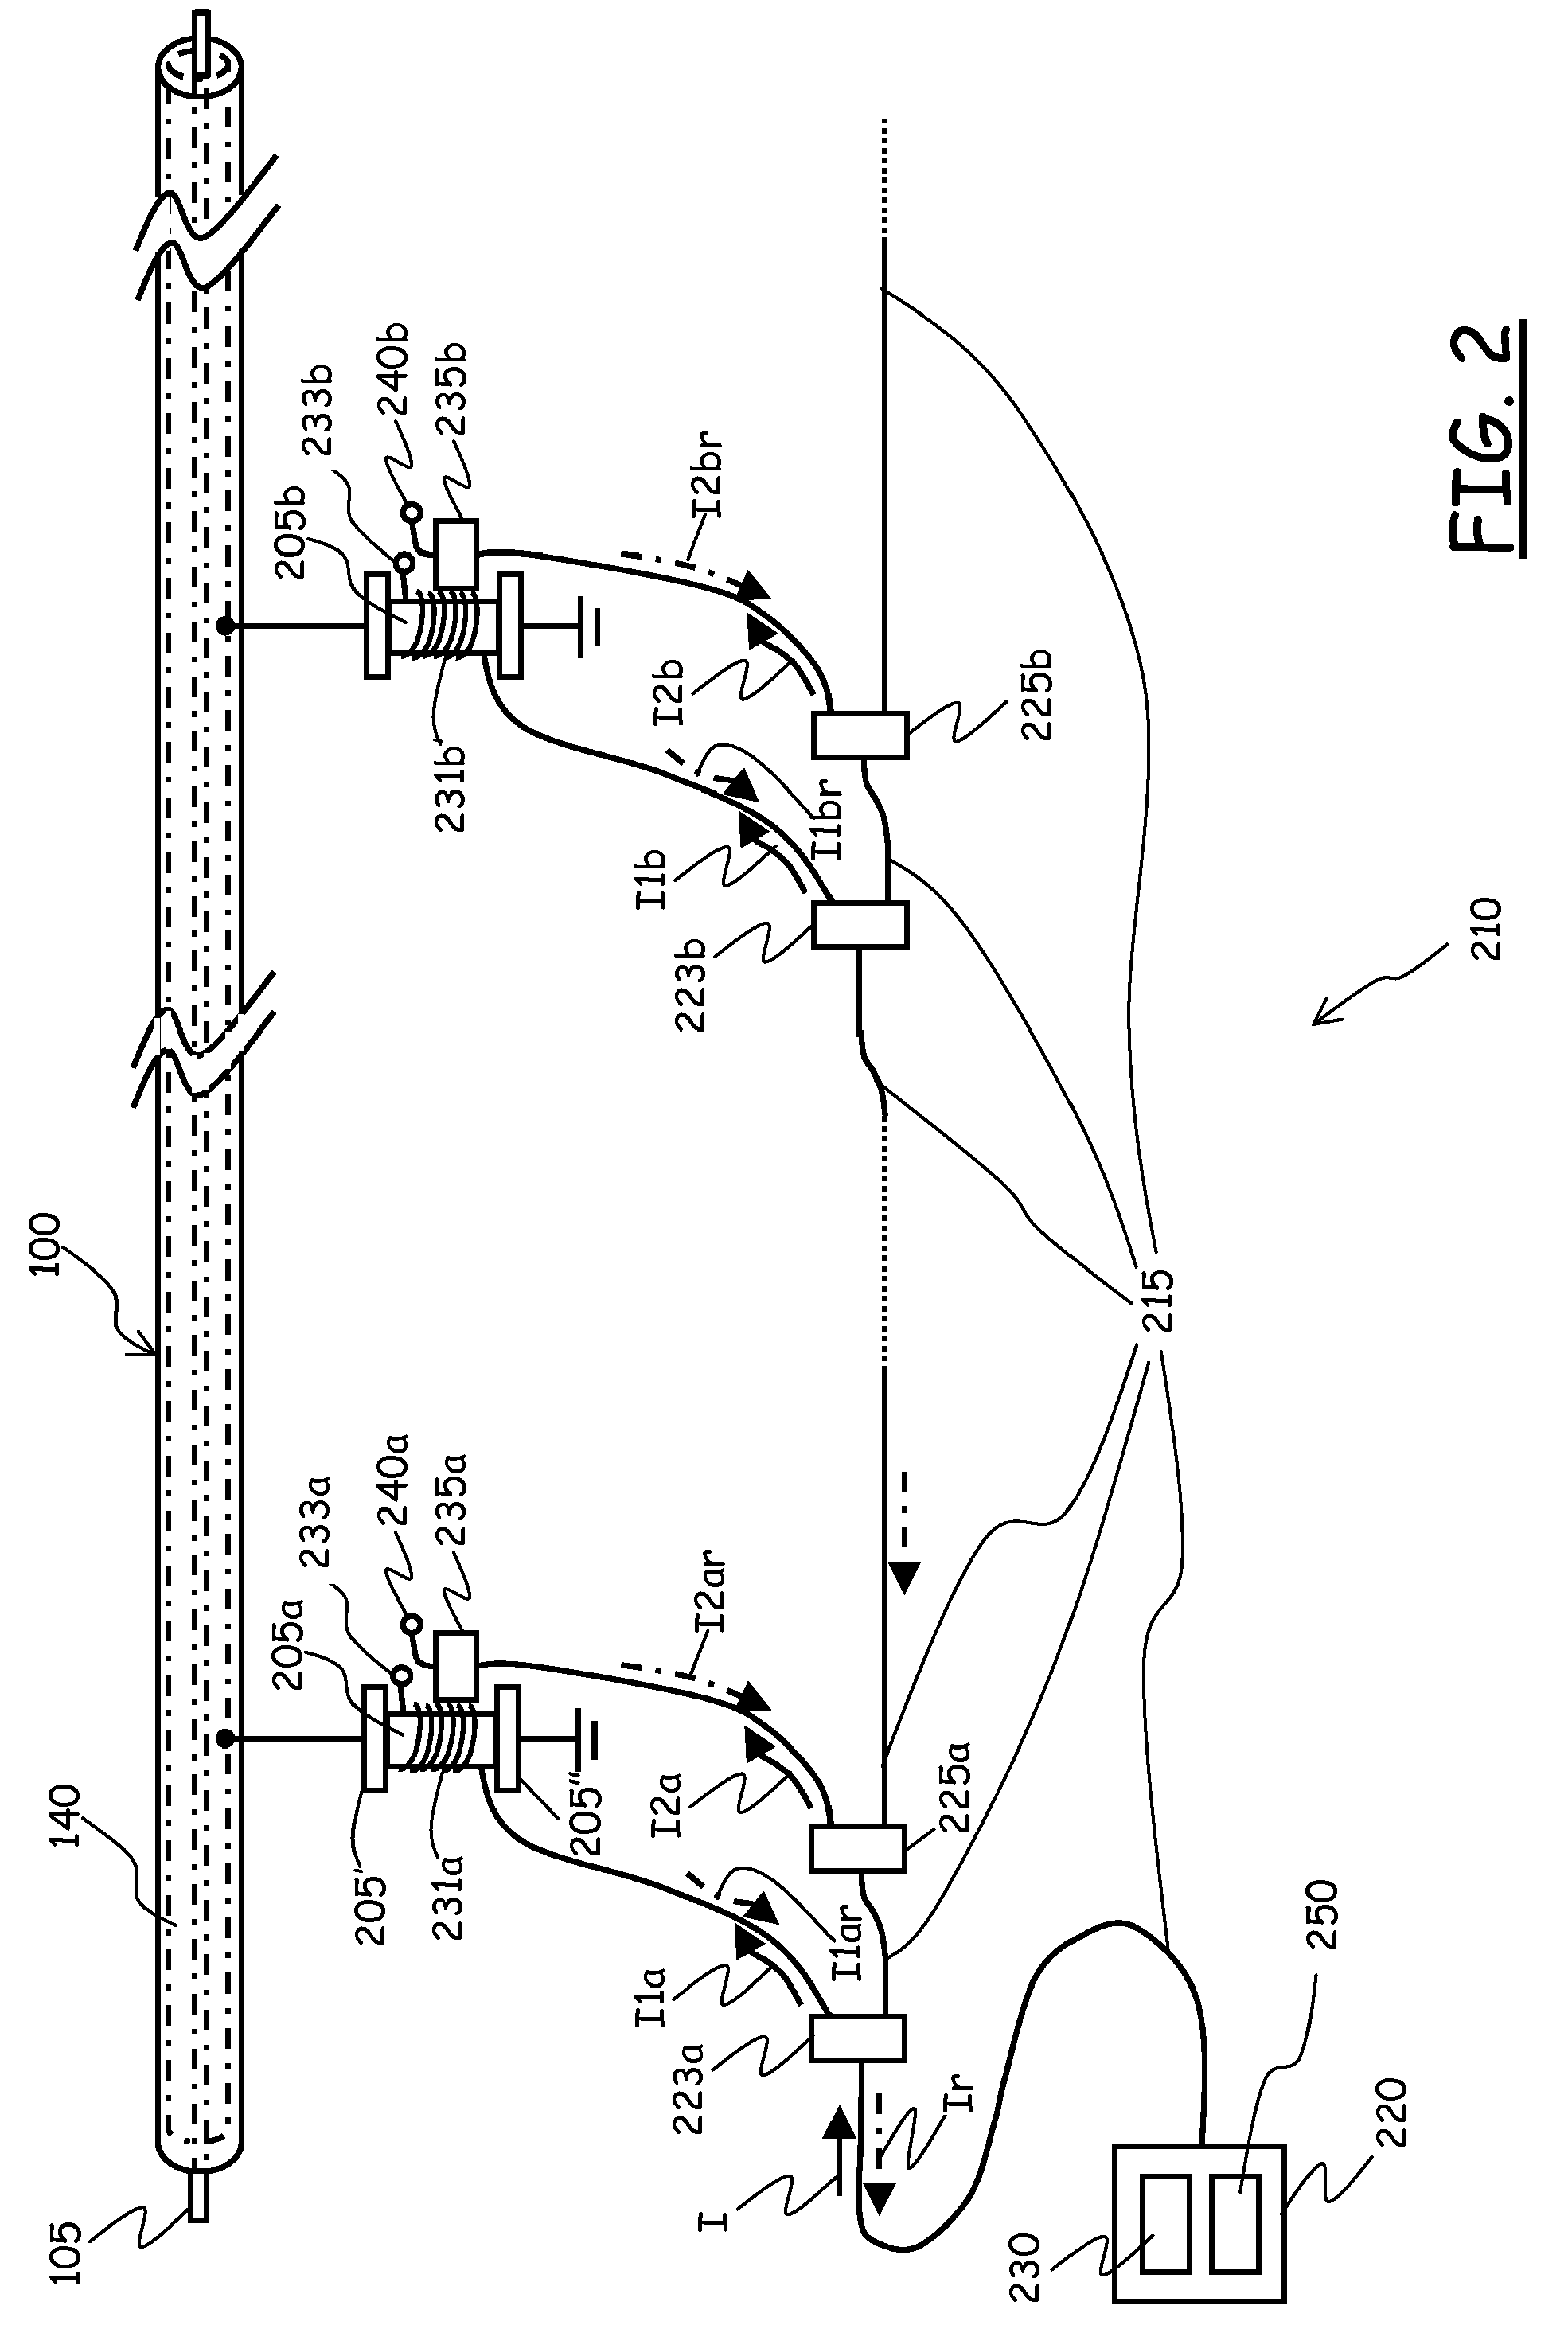 Method and system for fiber-optic monitoring of spatially distributed components